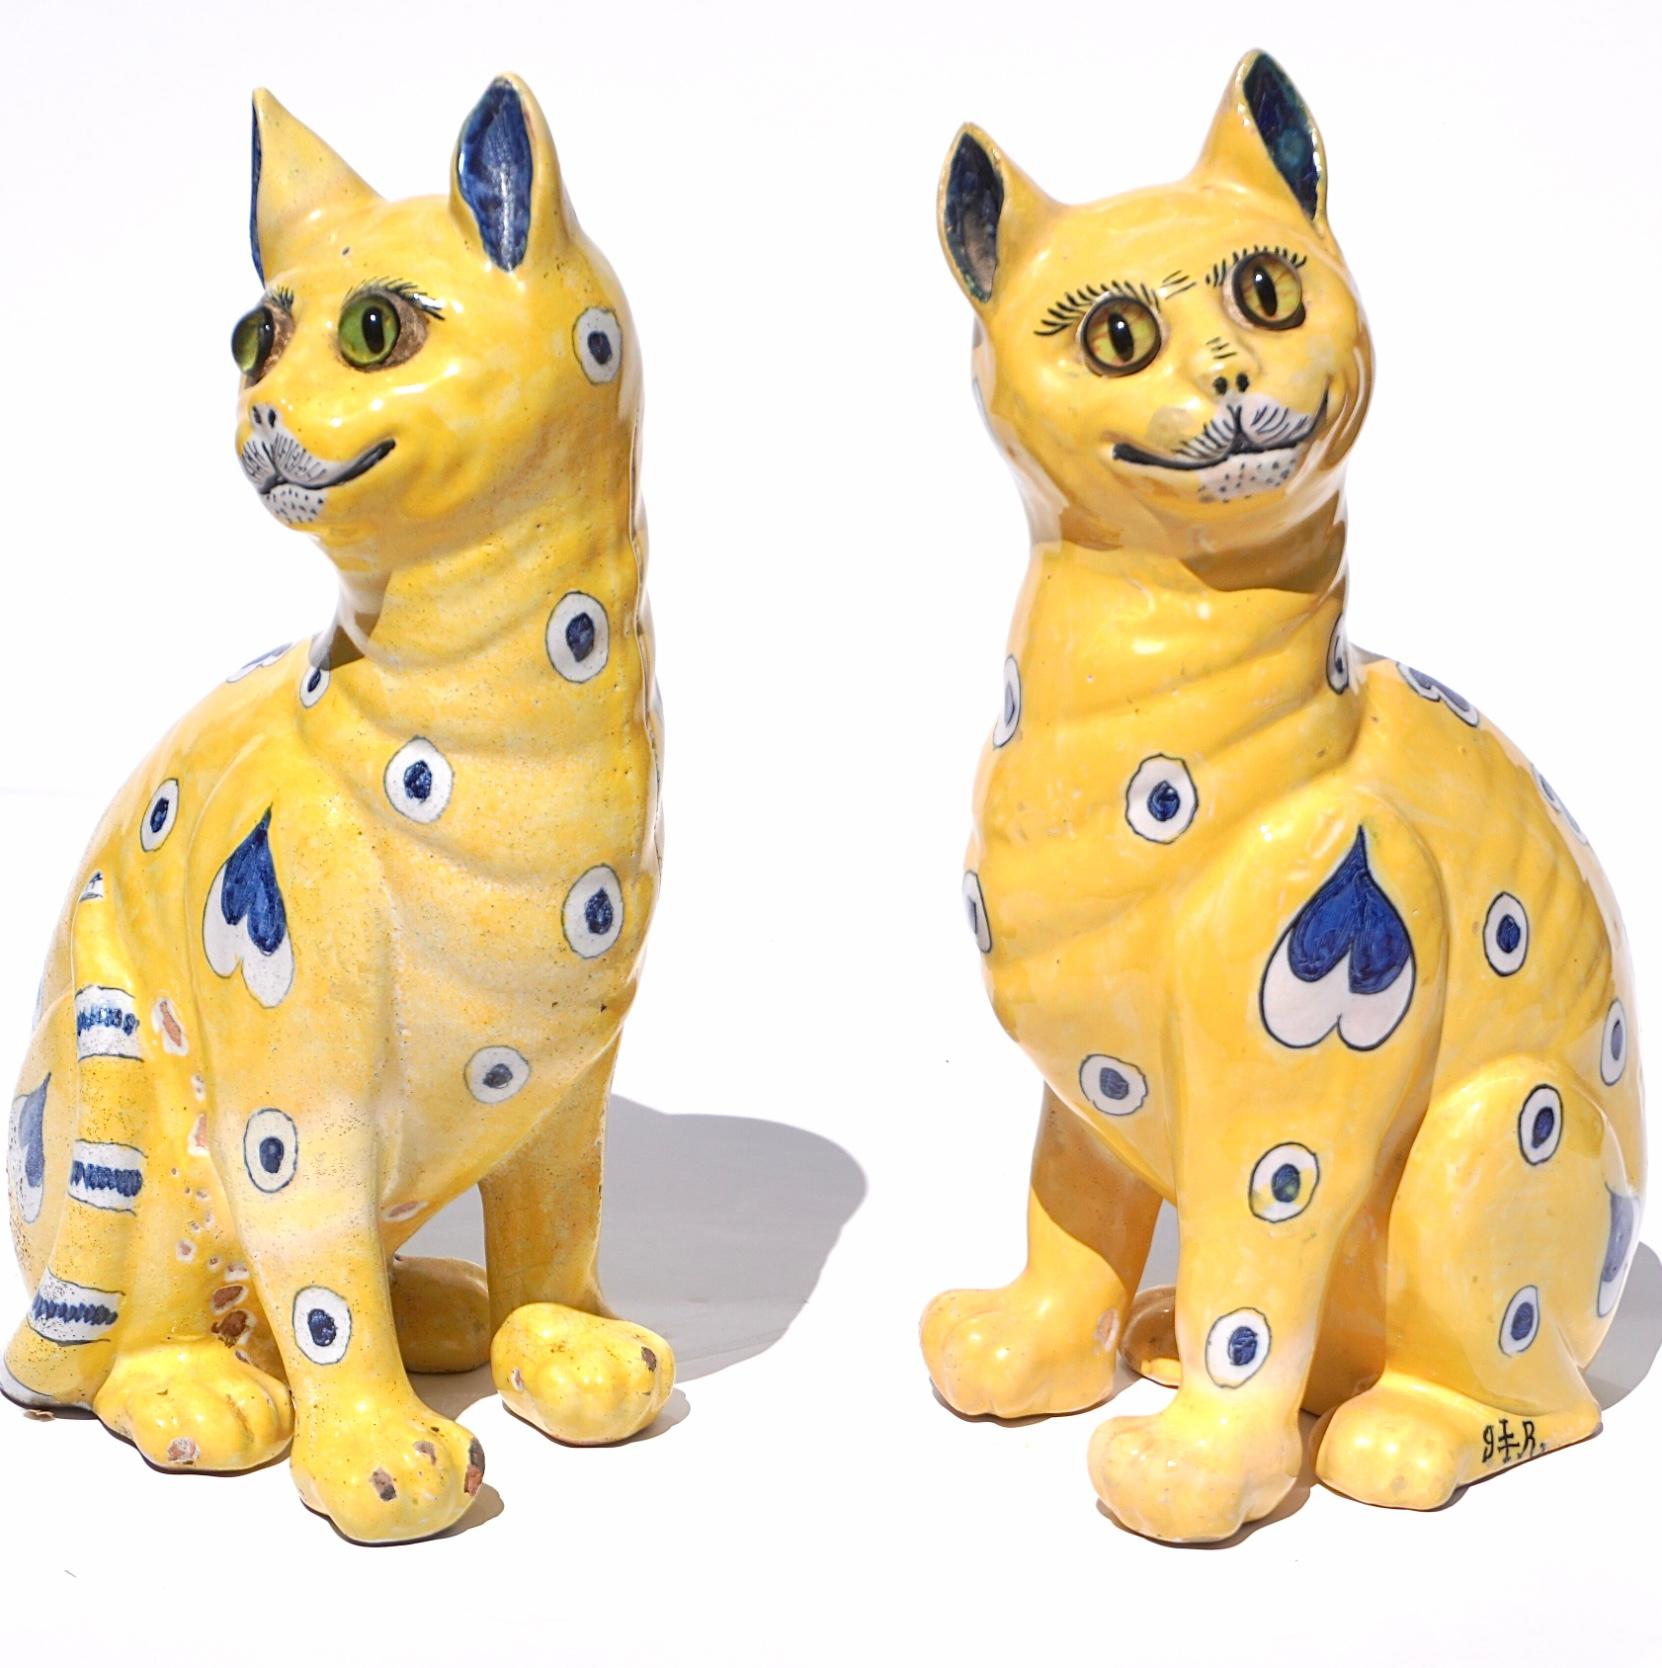 A pair of Emile Galle signed comical whimsical cats with glass eyes made in Nancy France
Circa 1890. Nancy France
Signed on legs with the Gallé Reinemer mark.

The pair of faience yellow ground glazed cats with yellow and green glass eyes created at